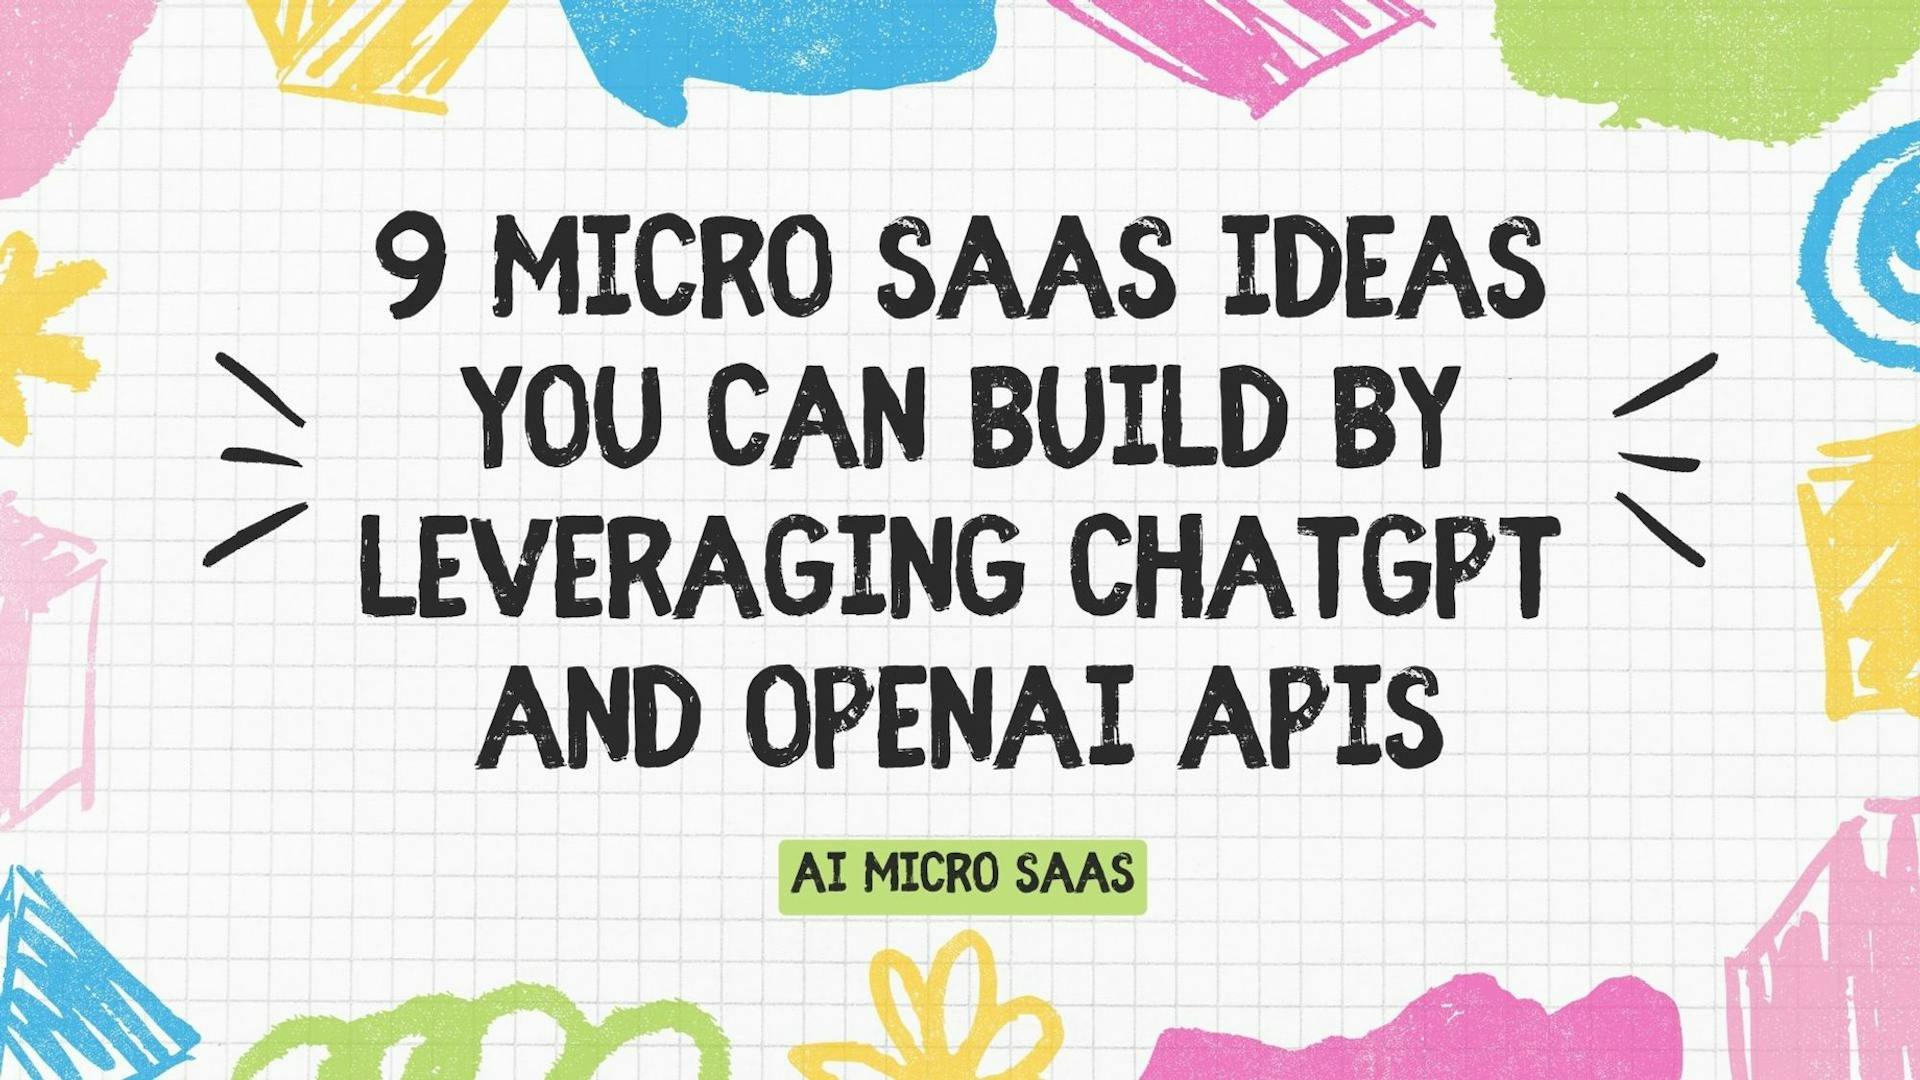 Cover Image for 9 Micro SaaS Ideas you can build by leveraging ChatGPT and OpenAI APIs